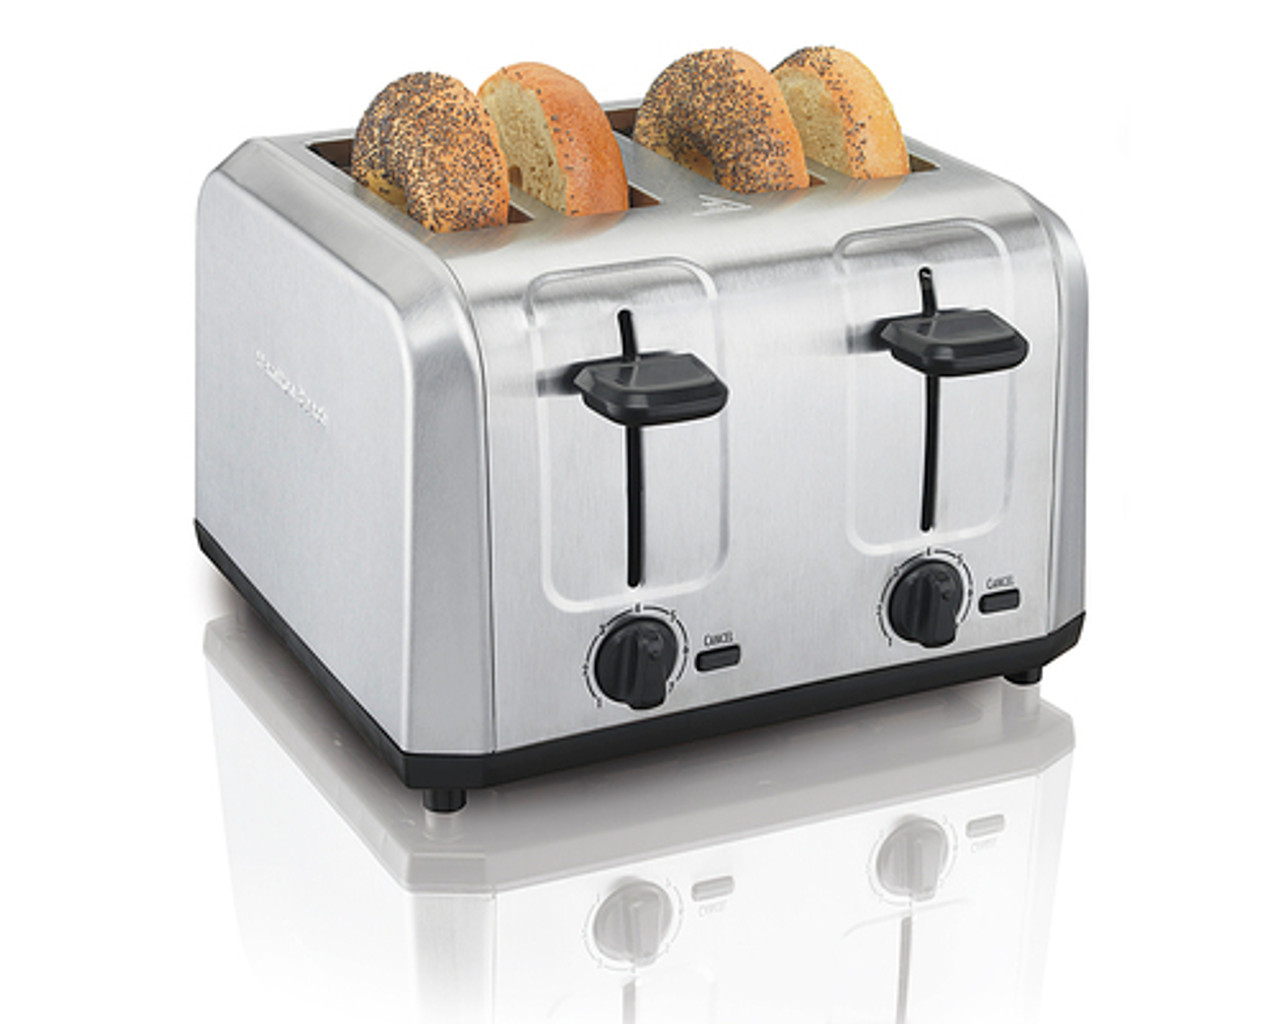 Hamilton Beach - Brushed Stainless Steel Toaster - STAINLESS STEEL